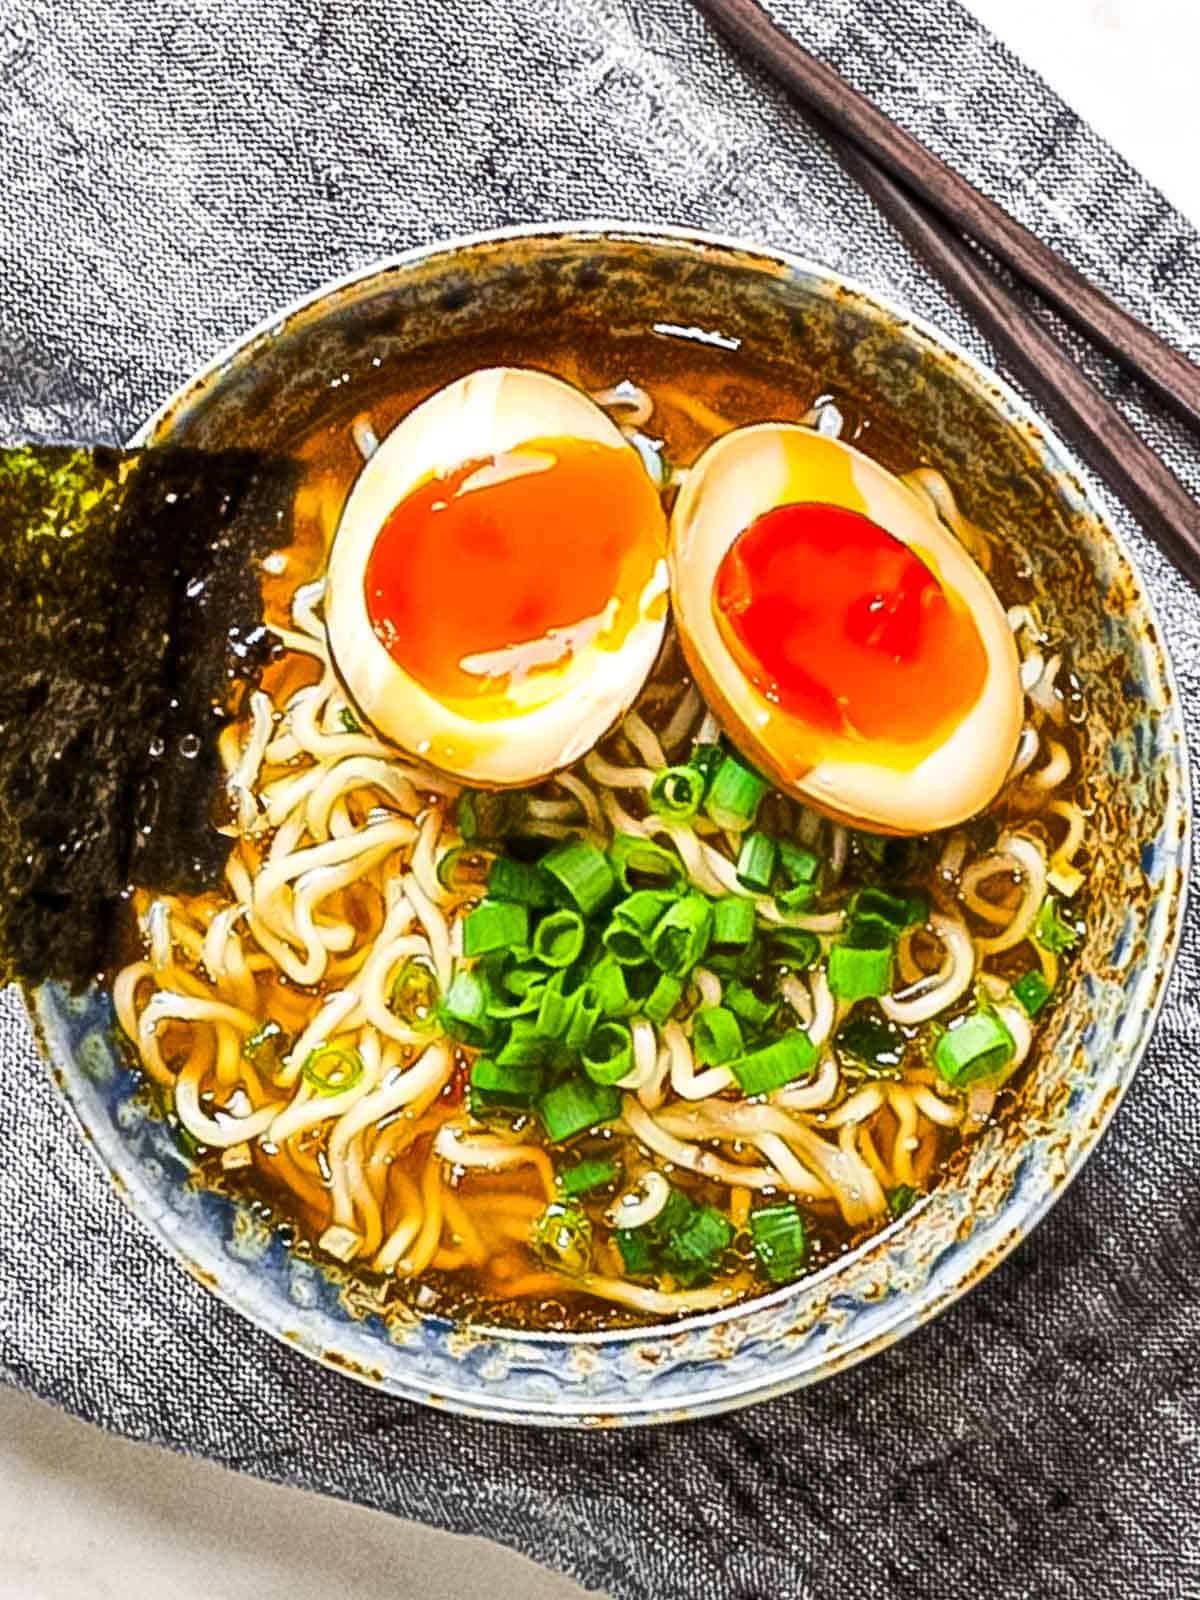 Ramen eggs (ajitama) marinated in soy sauce cut in half and placed on top of a bowl of ramen noodles garnished with green onions and nori.